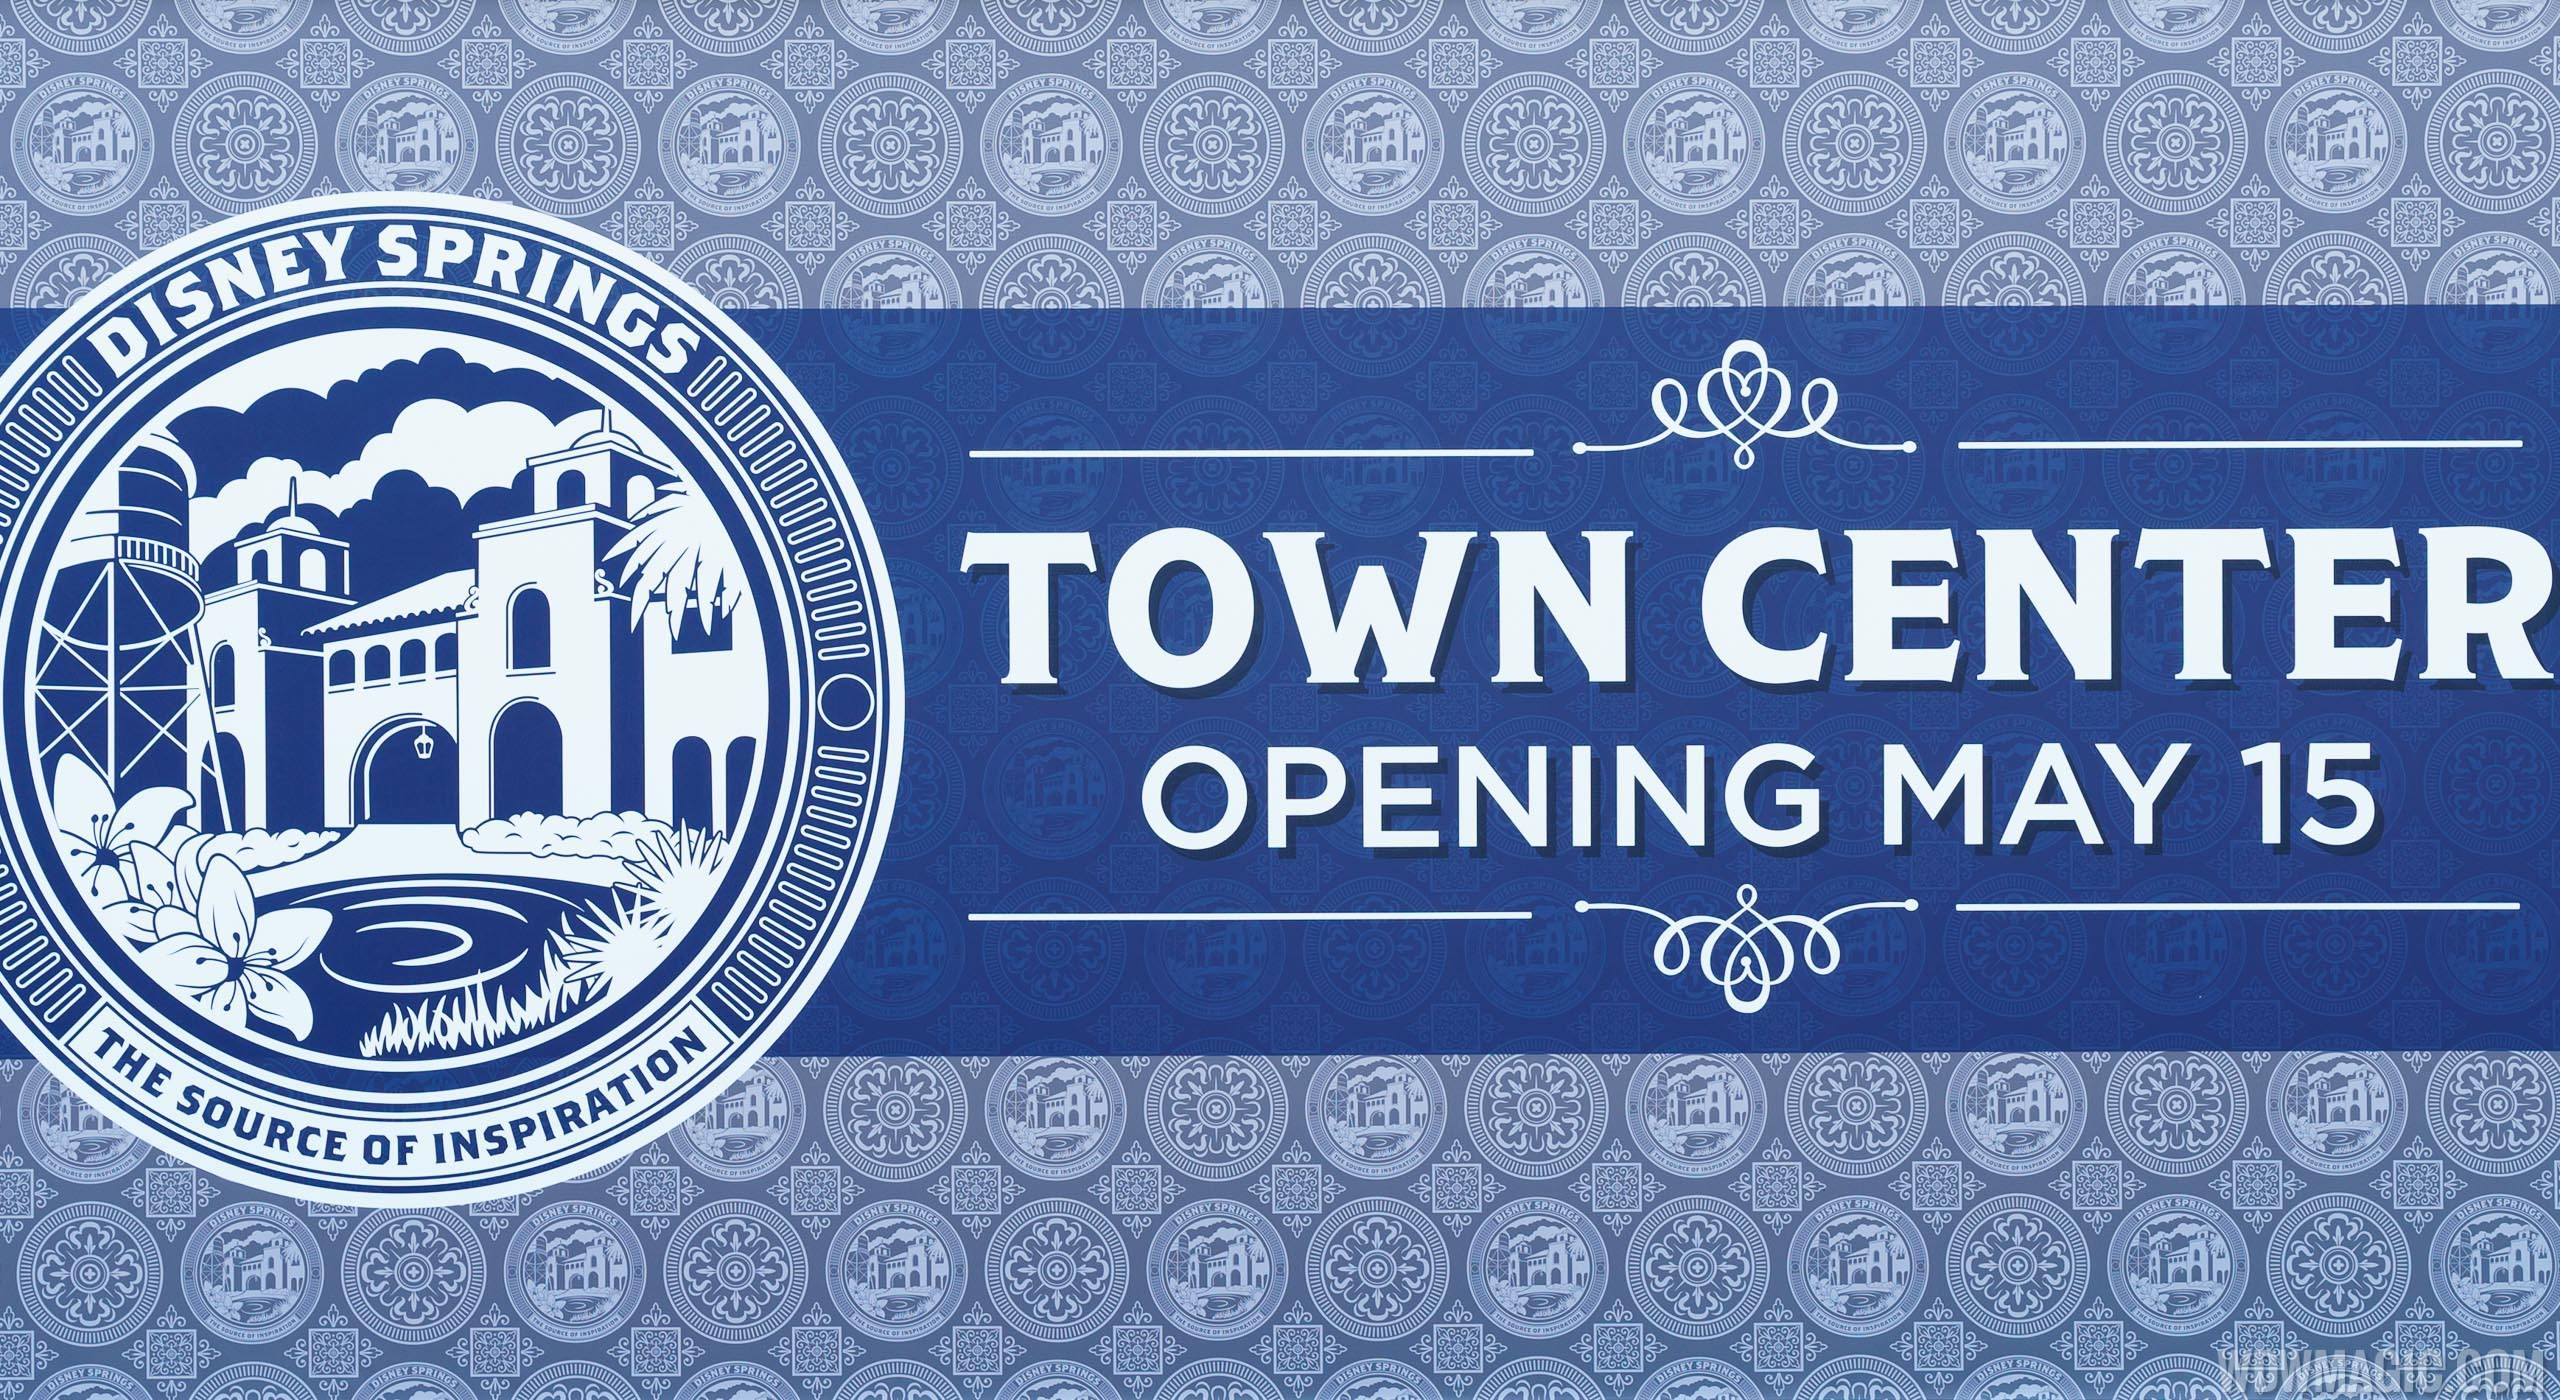 What's opening this weekend at the Town Center in Disney Springs